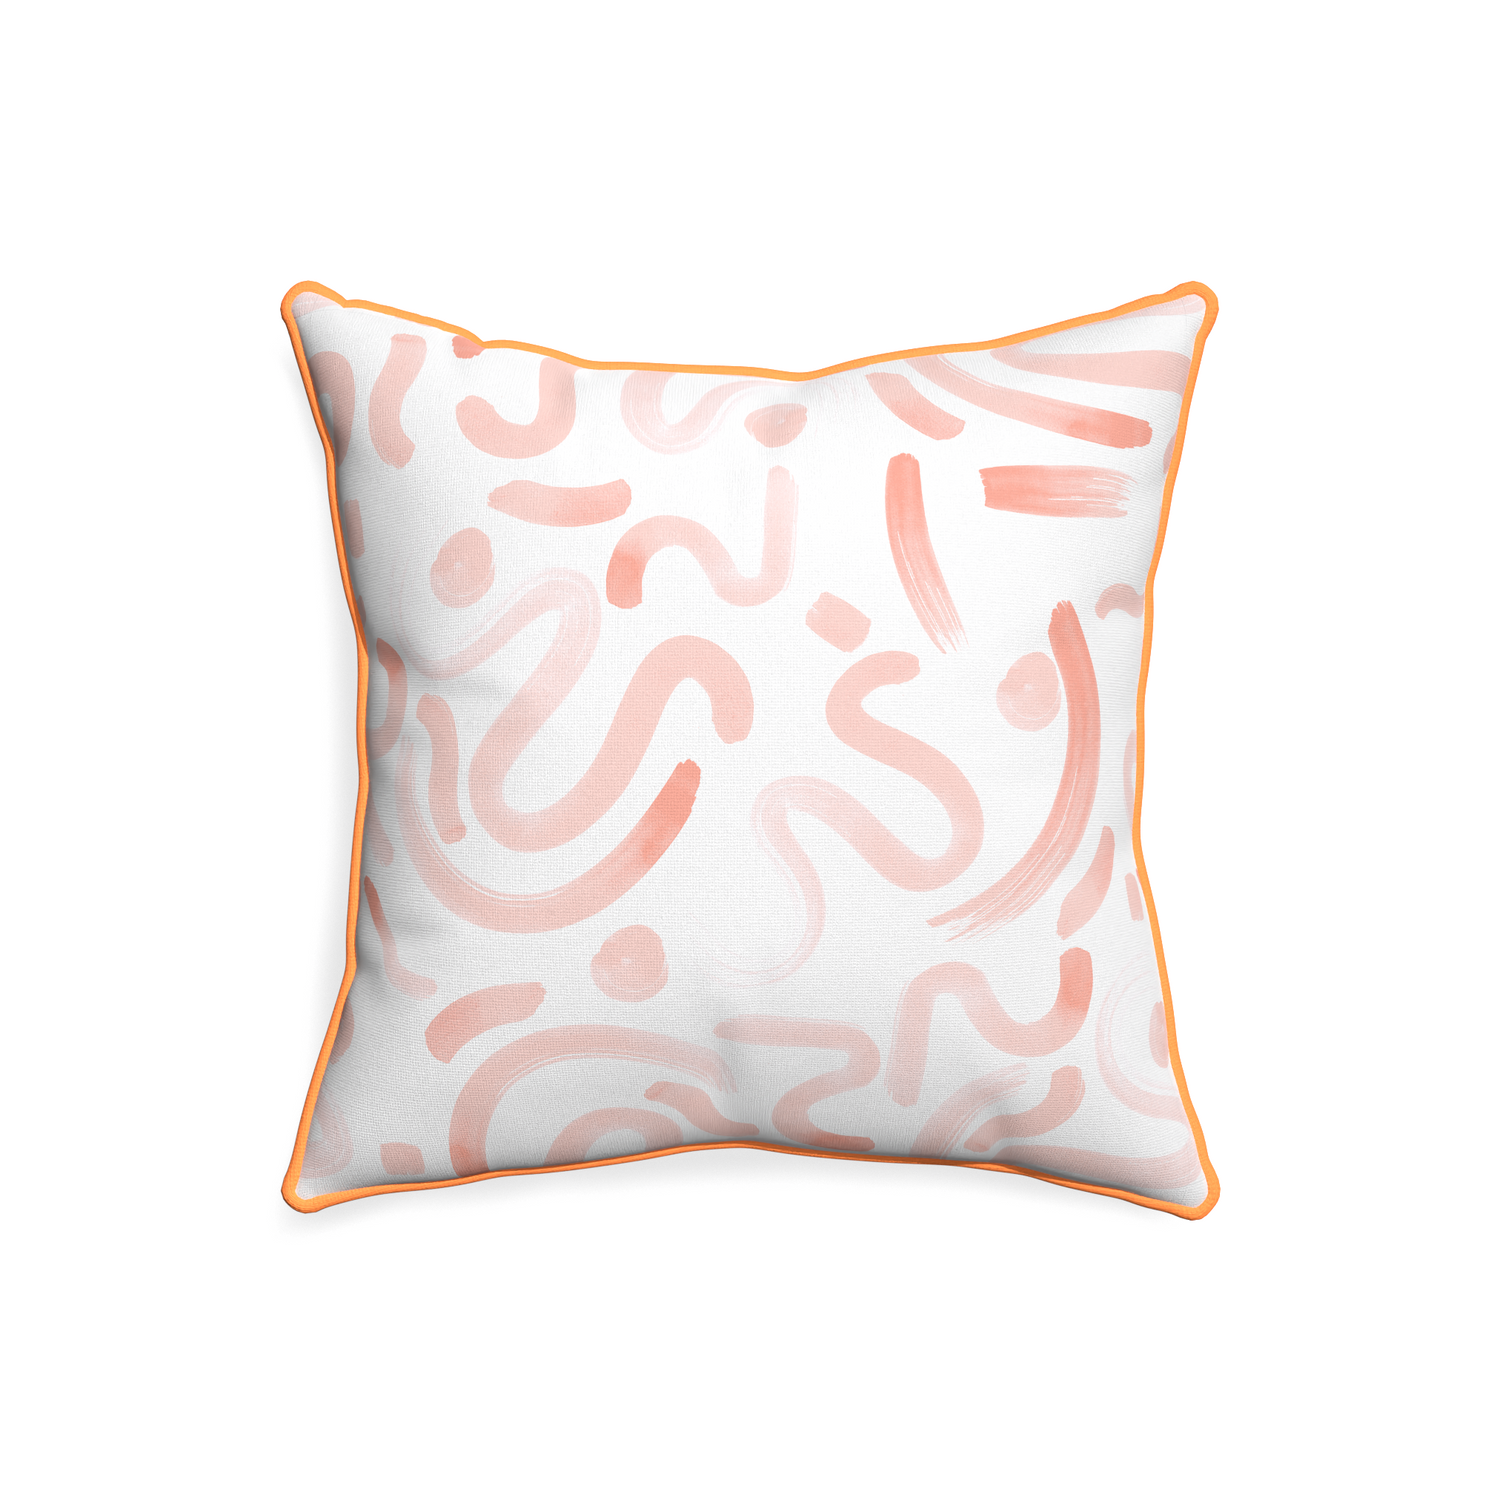 20-square hockney pink custom pillow with clementine piping on white background